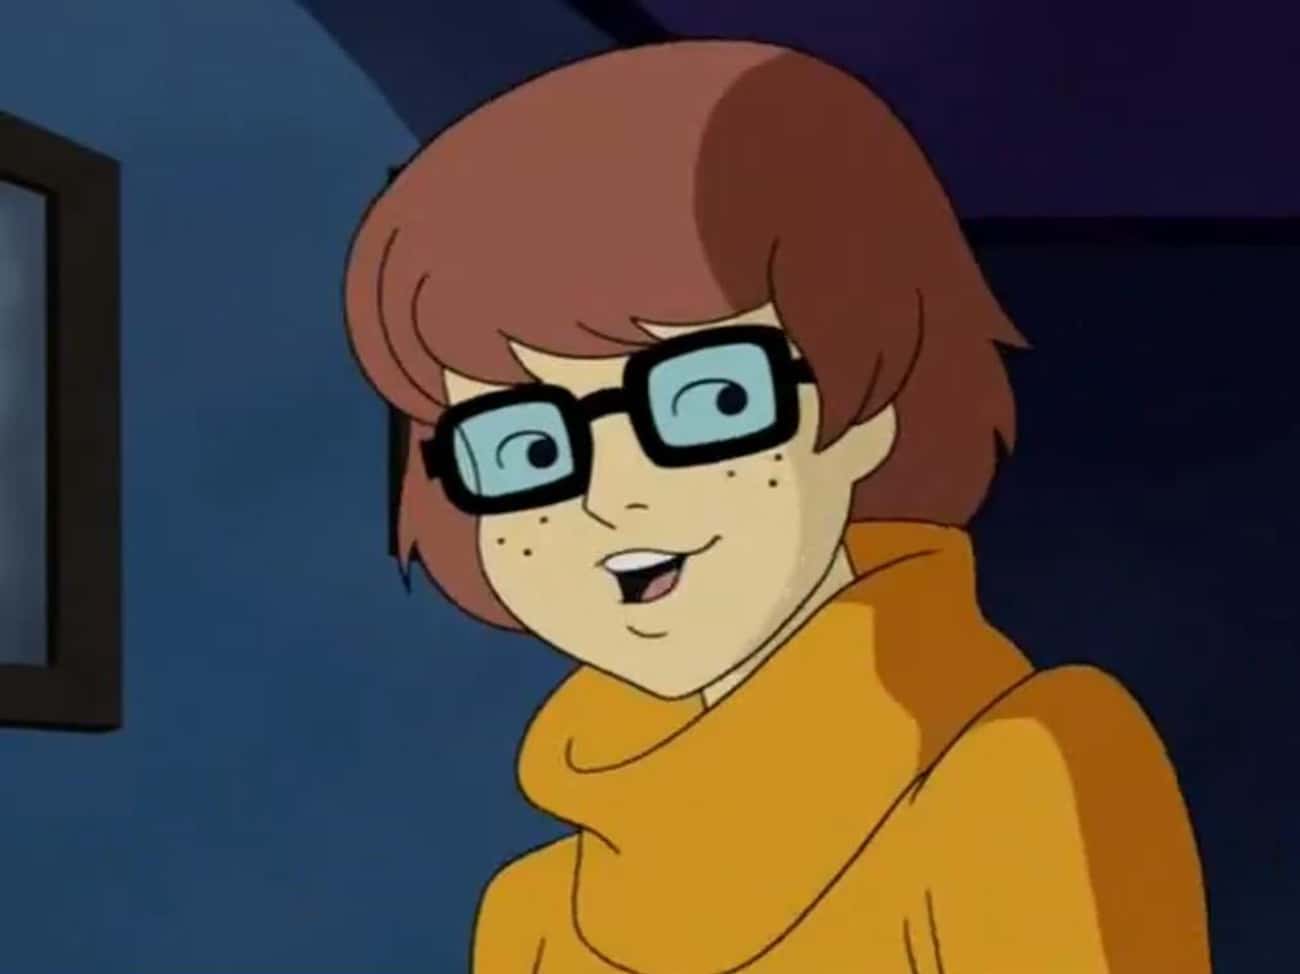 Velma Is A Lesbian, She Just Hasn't Come Out Yet